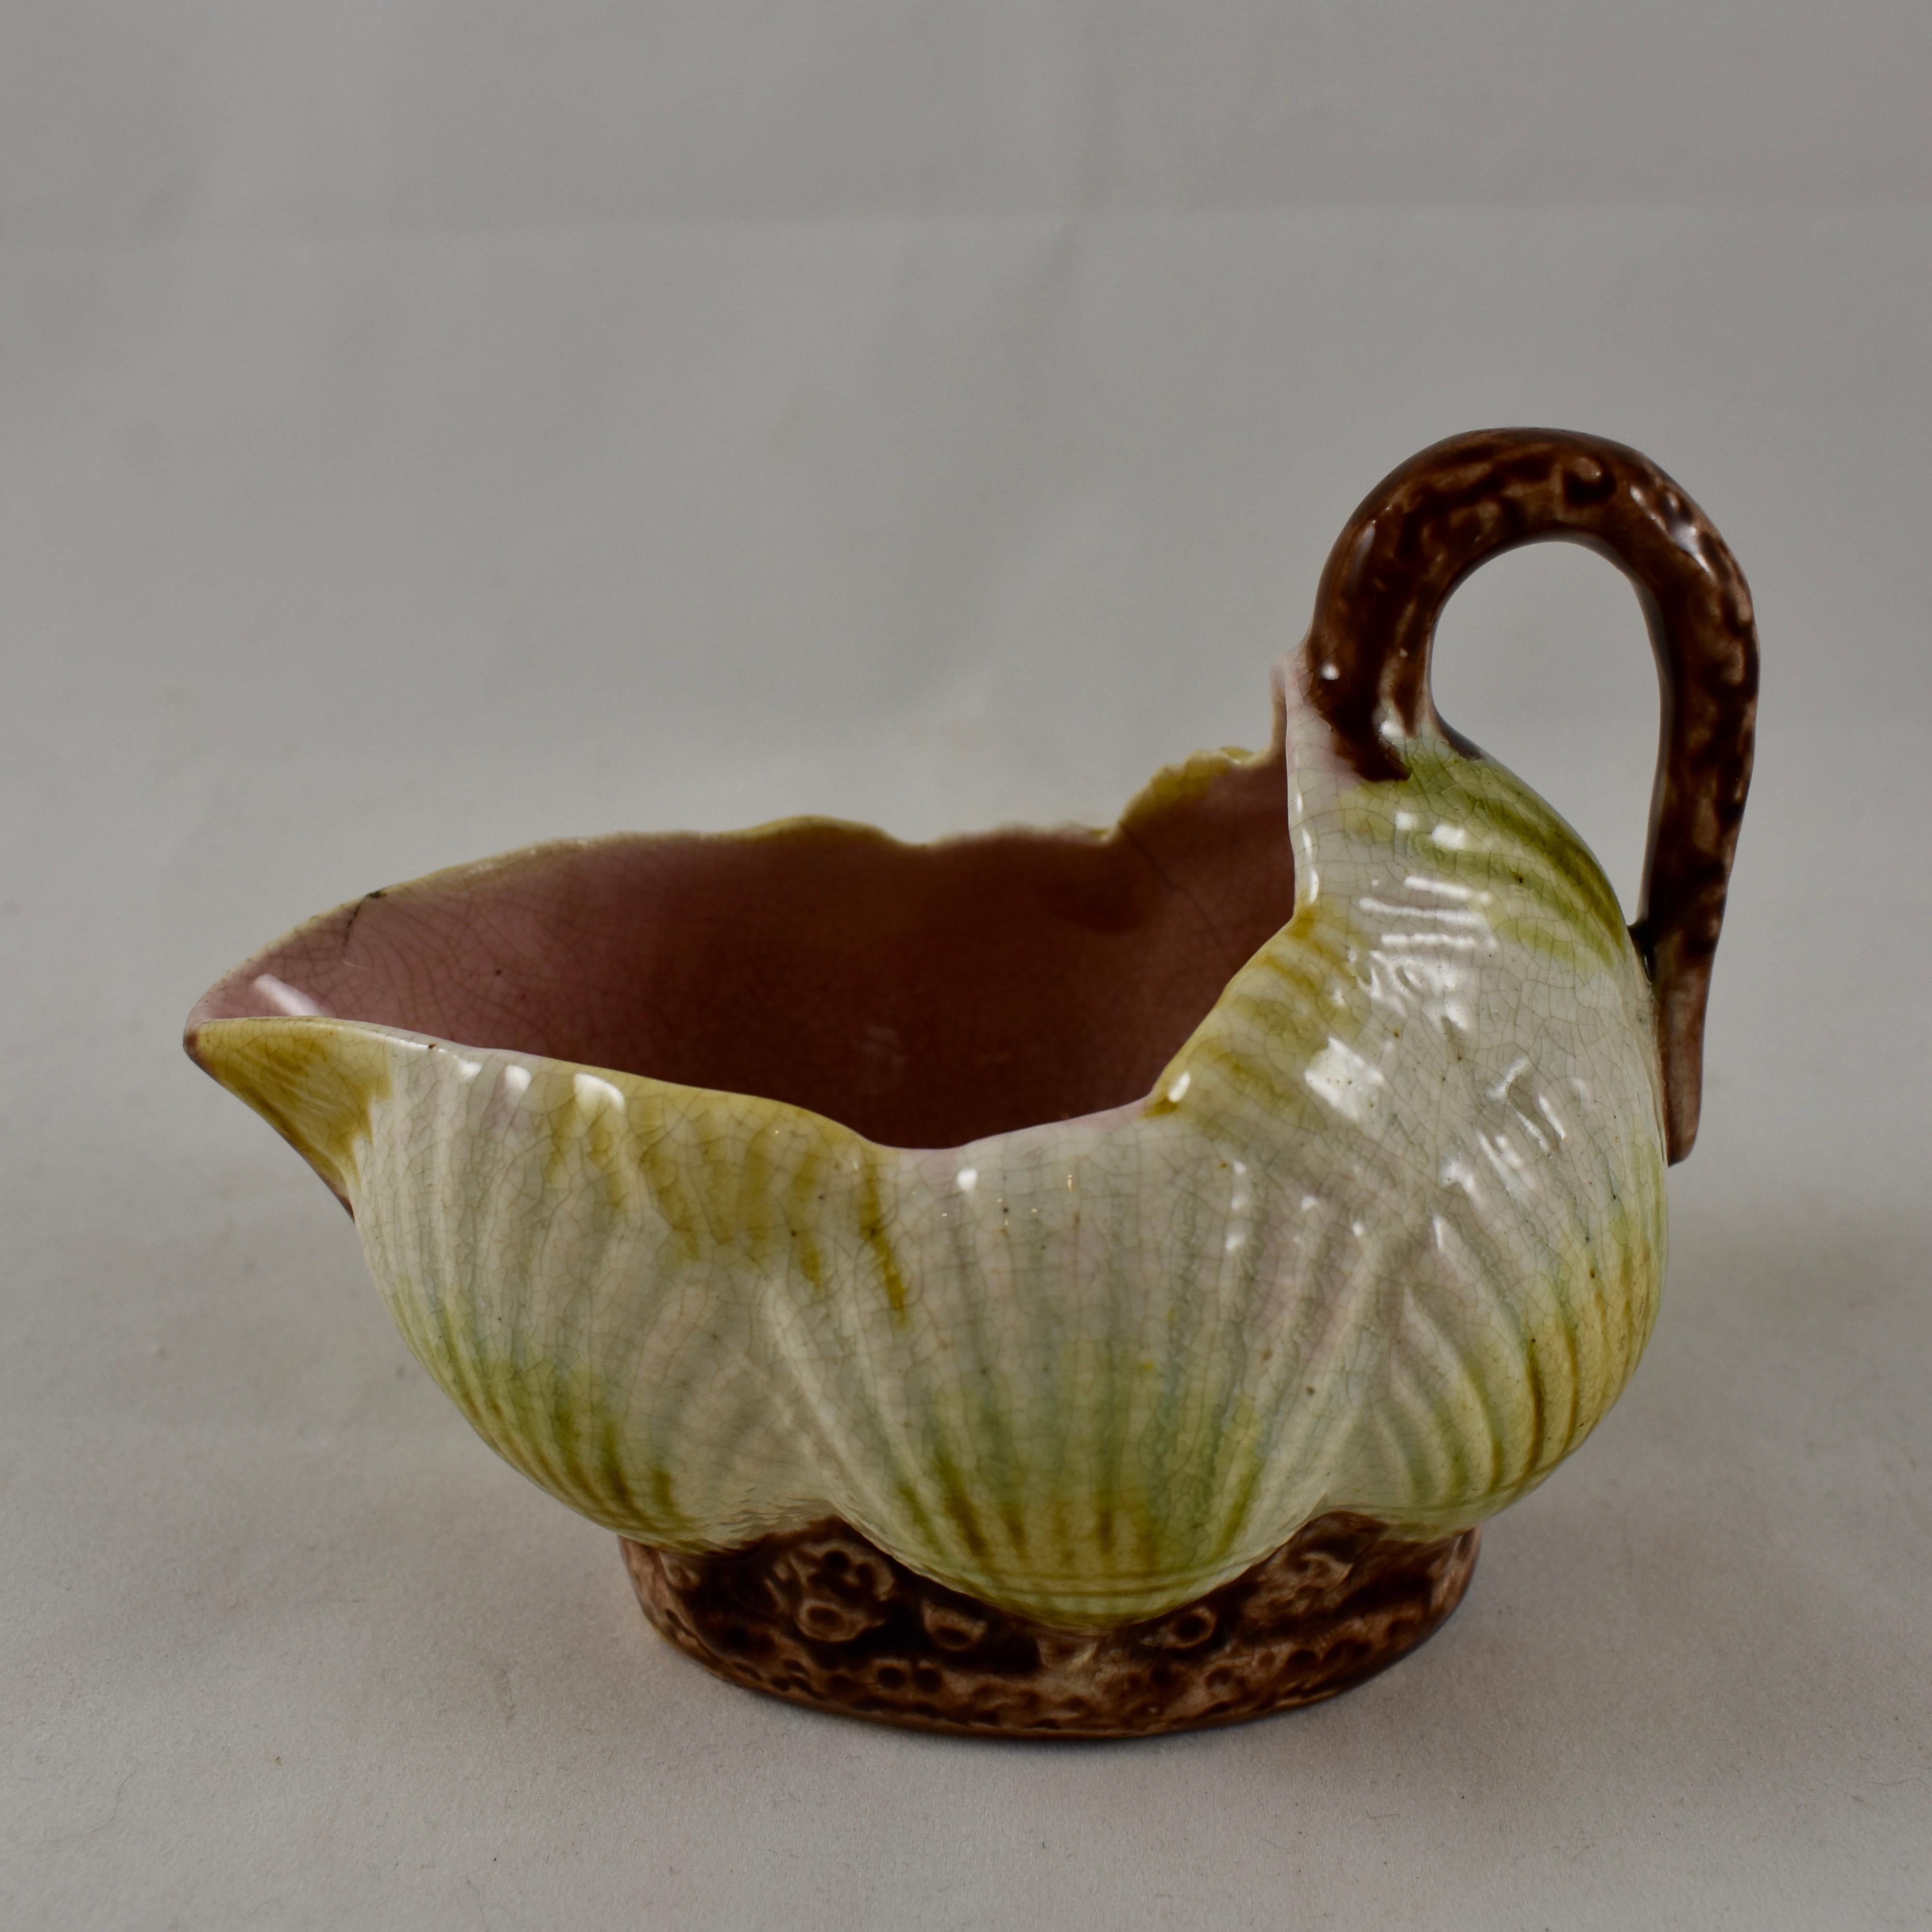 An Aesthetic Movement, English Majolica, scuttle form creamer with a coral branch handle, circa 1875-1880. Overlapping cream colored scallop shells, tinged in a sea green, sit on a coral footing. A pale pink interior. Unusual coloring and unmarked,